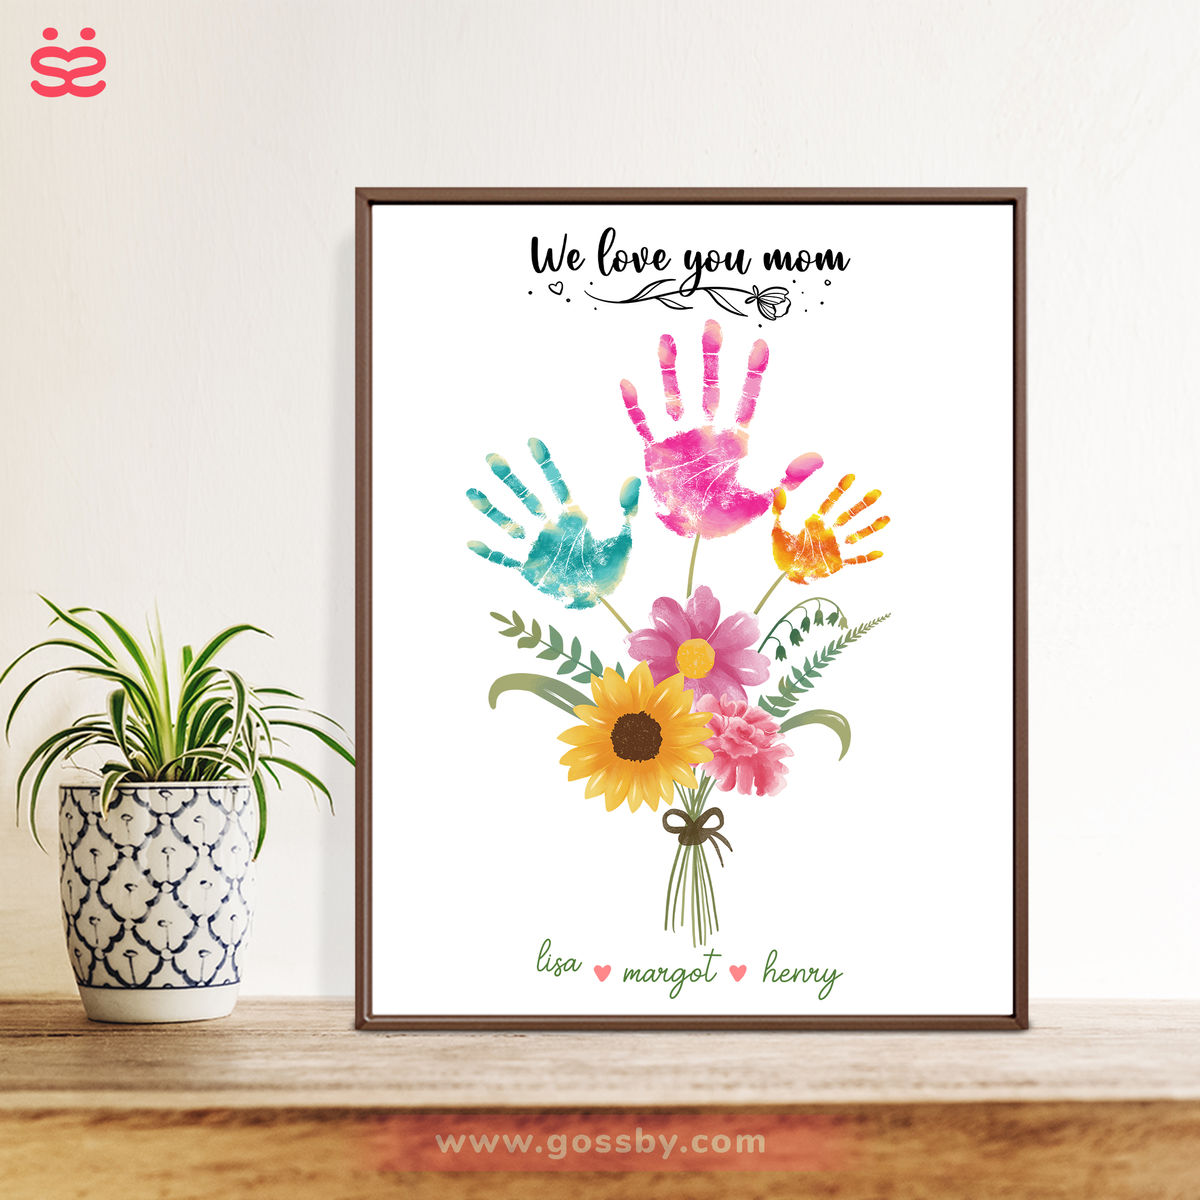 Personalized Poster - Love Poster - We love you mom (27374)_1